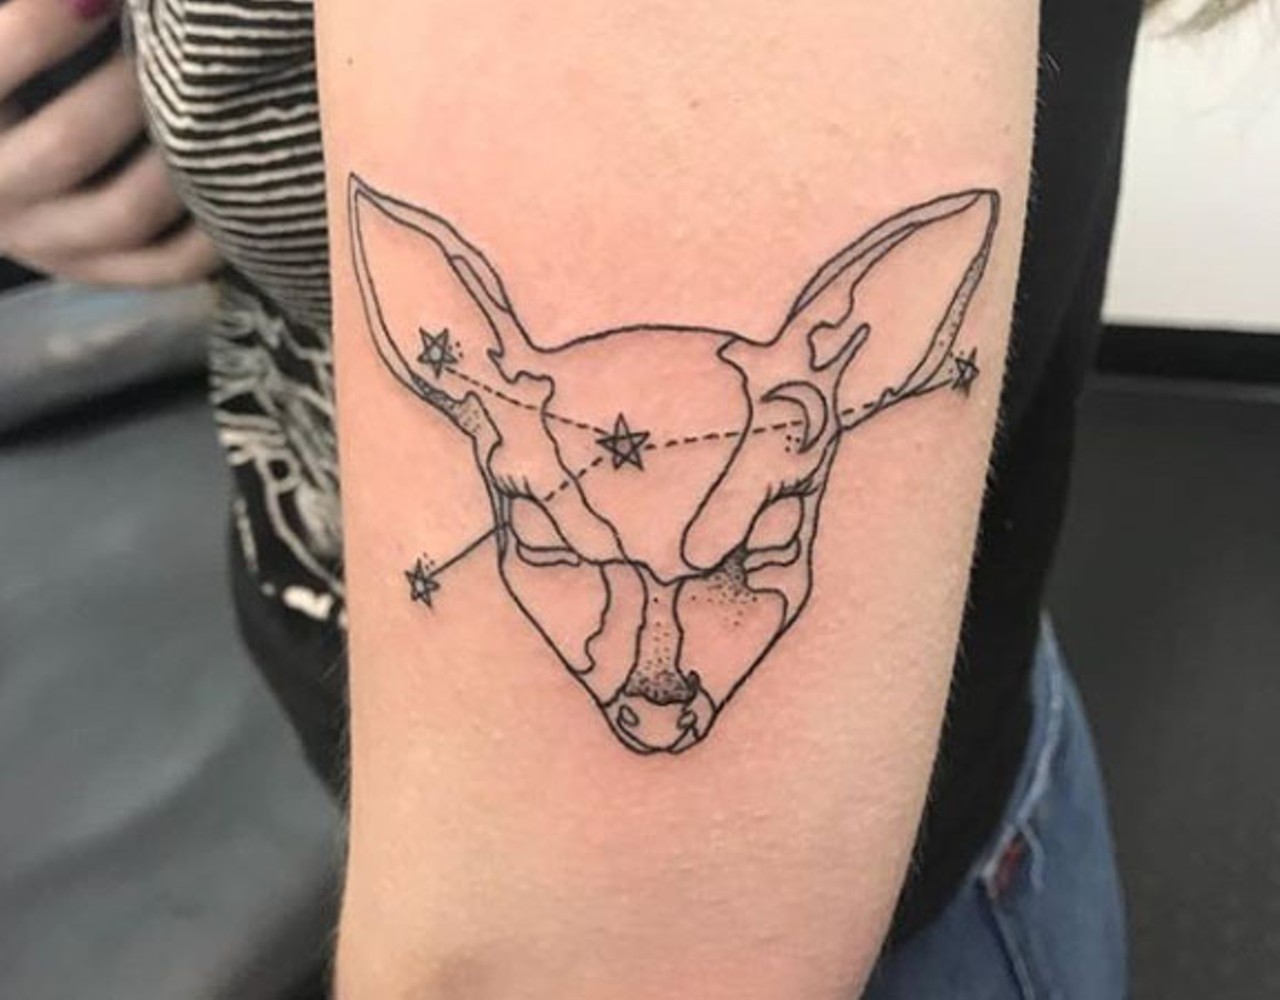 18 Cleveland Tattoo Shops You Should Already Be Following on Instagram |  Cleveland | Cleveland Scene